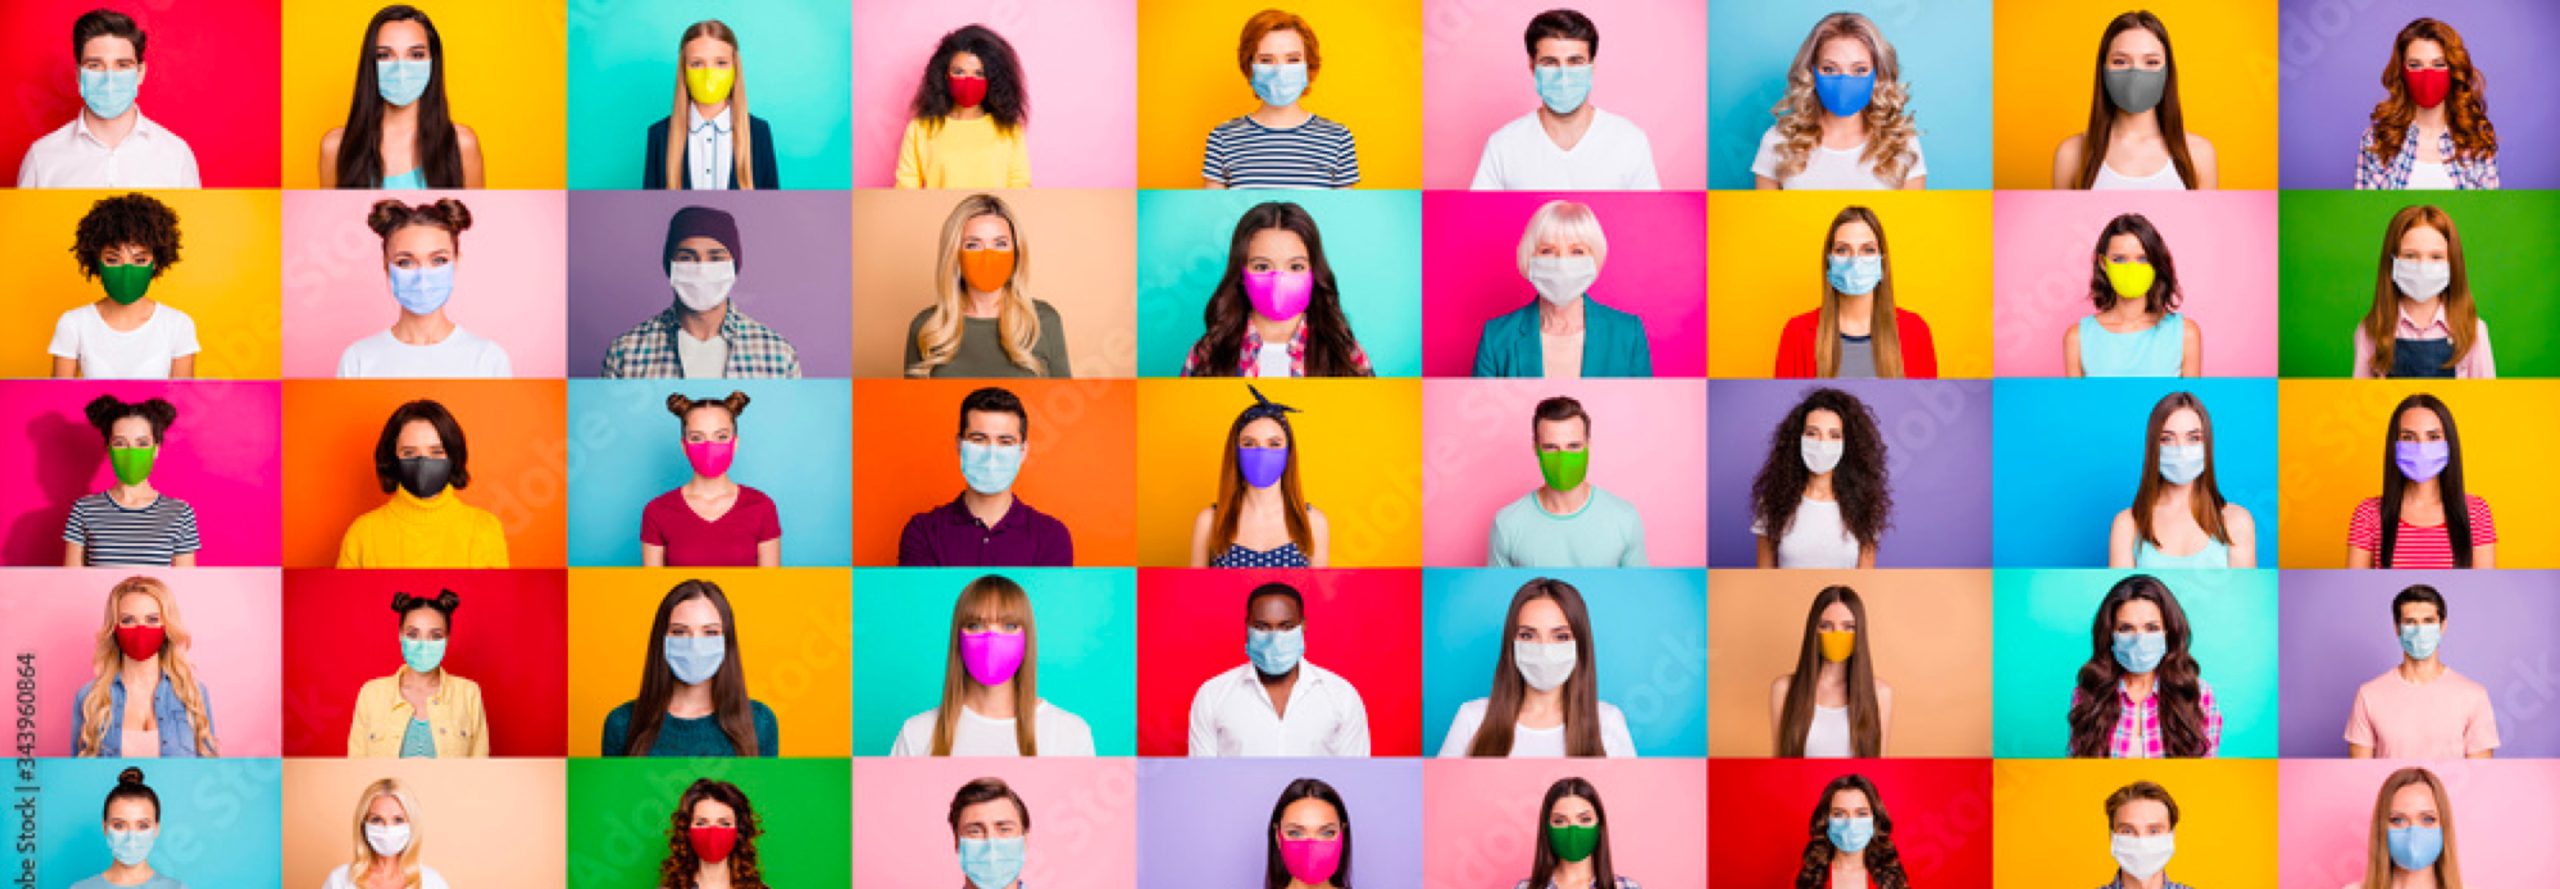 grid of images with different people wearing face masks with different colour bright backgrounds